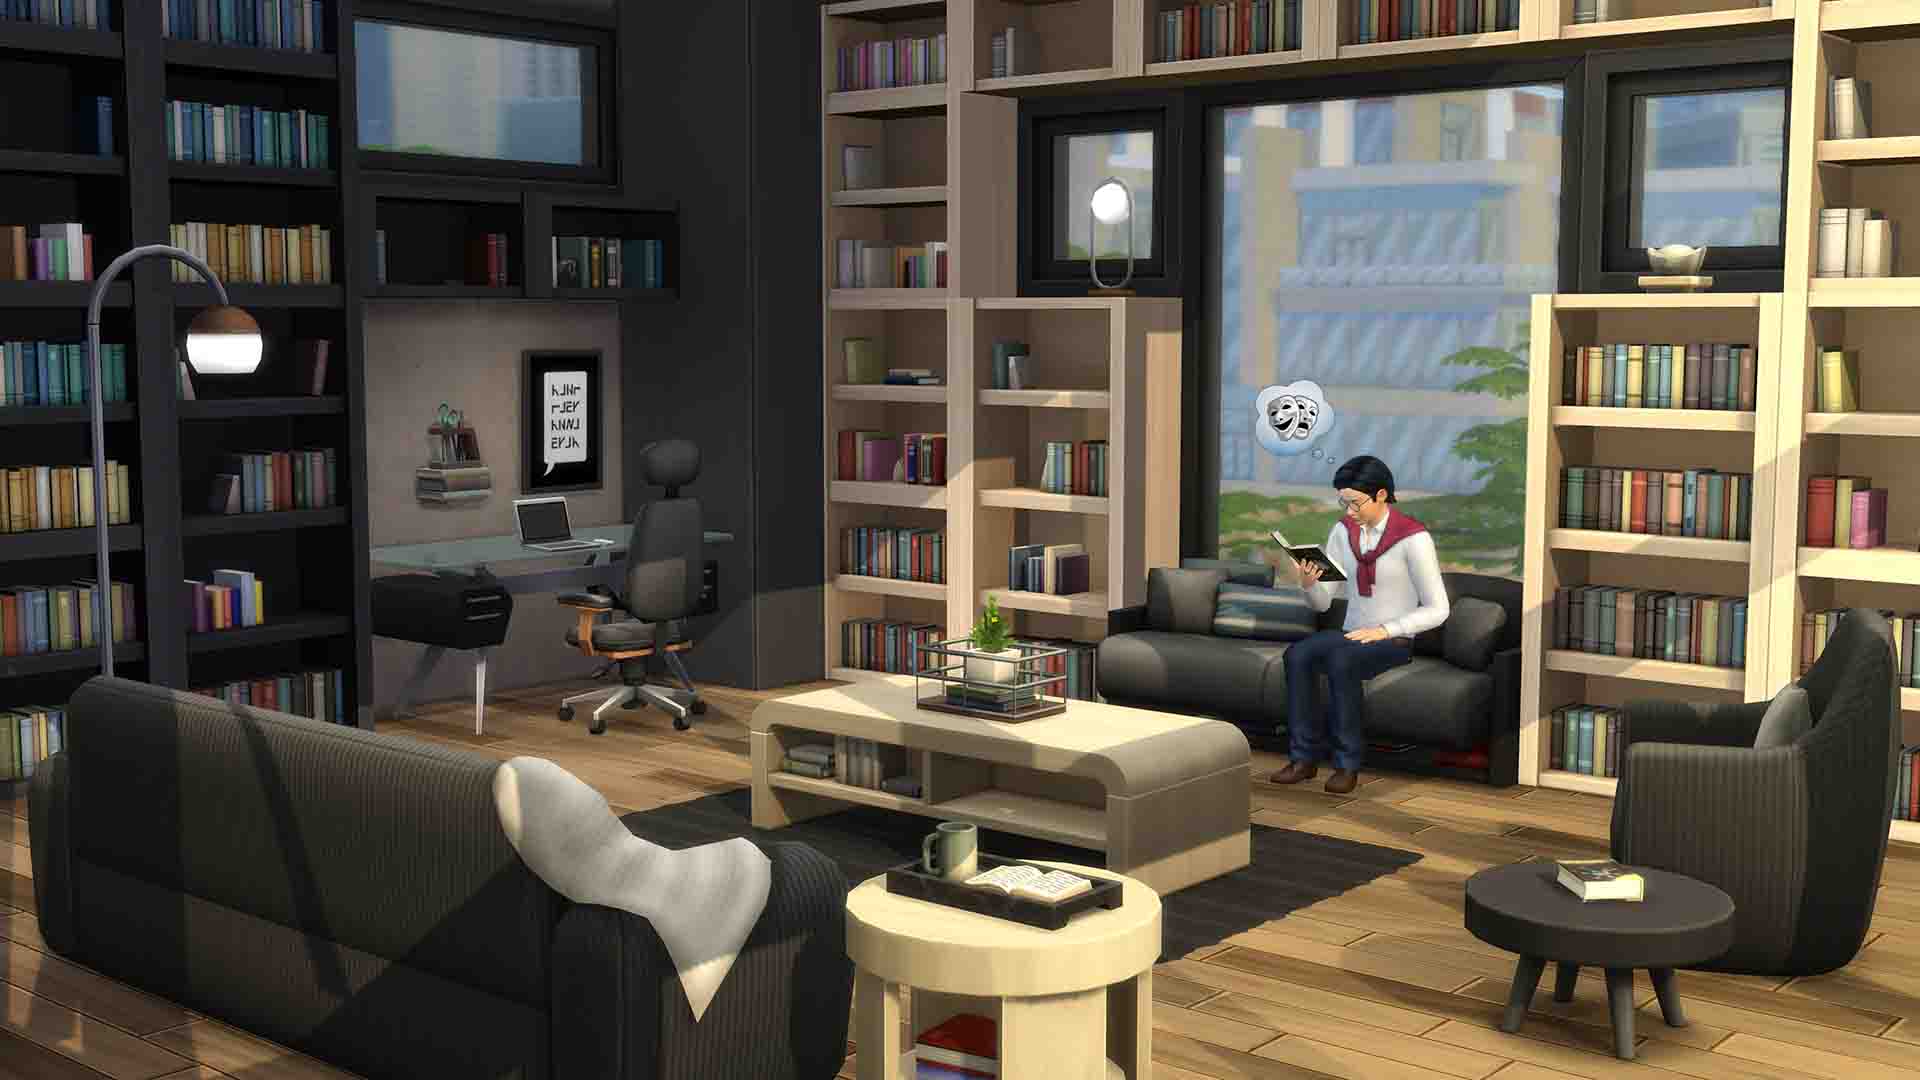 EA reveals The Sims 4 Grunge revival and Book Nook kits